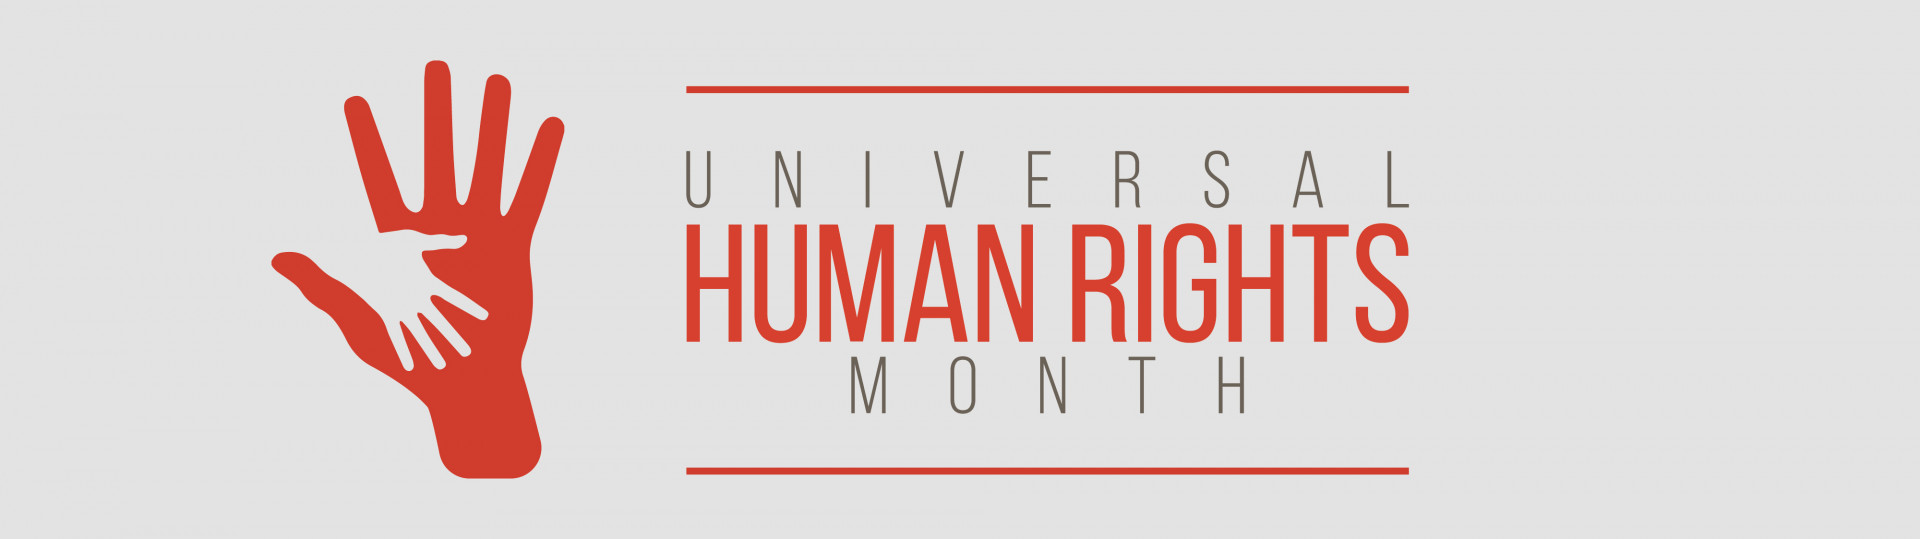 human rights month